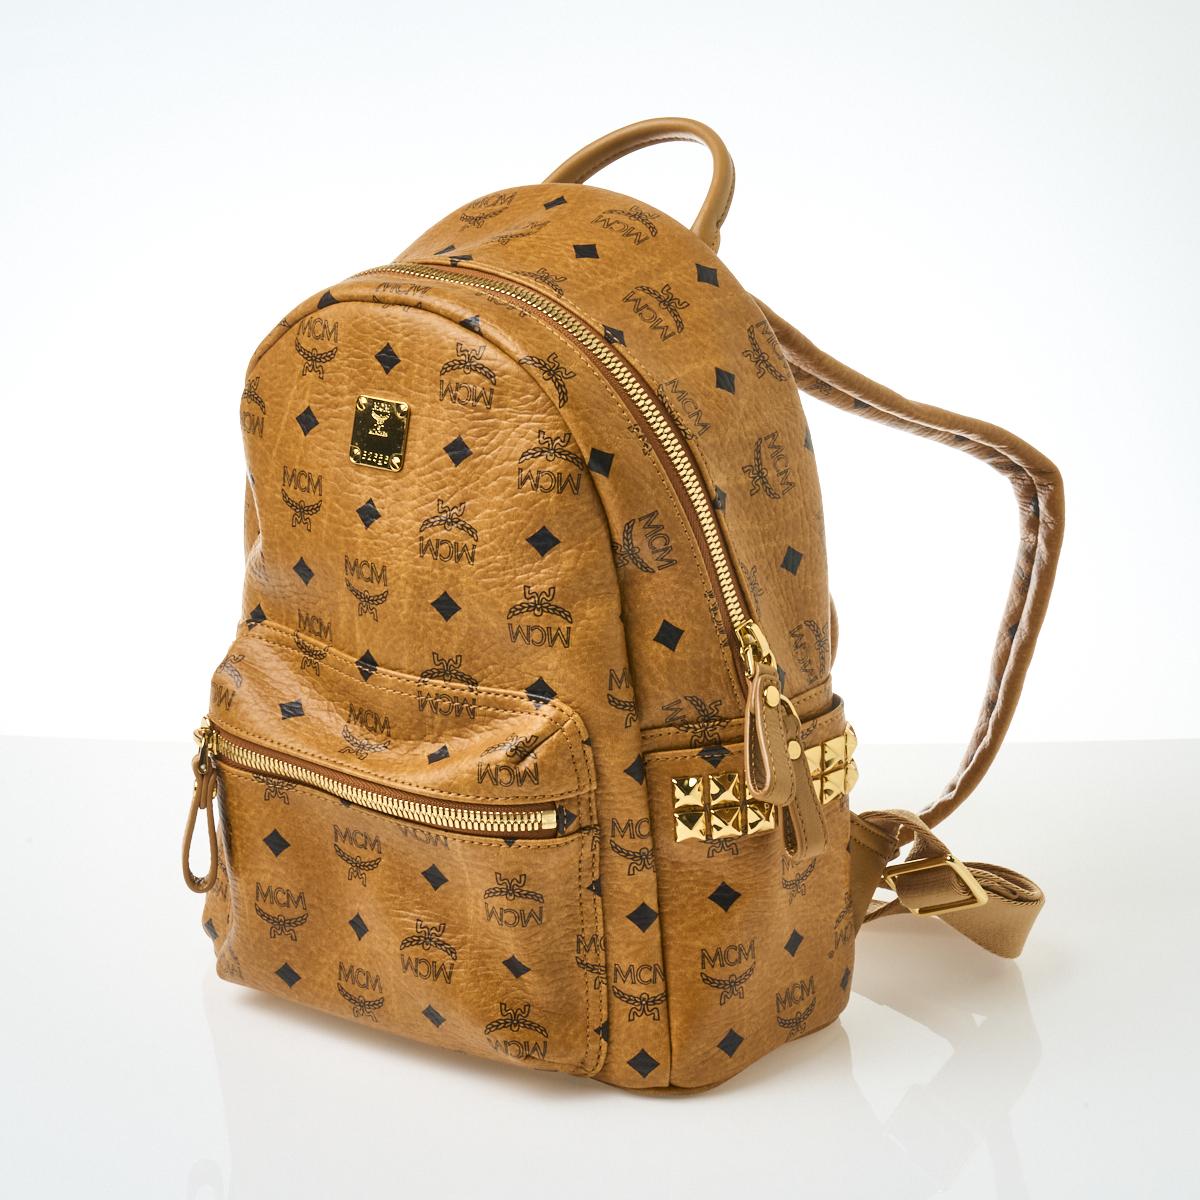 Sold at Auction: MCM Visetos Leather Crossbody Bag